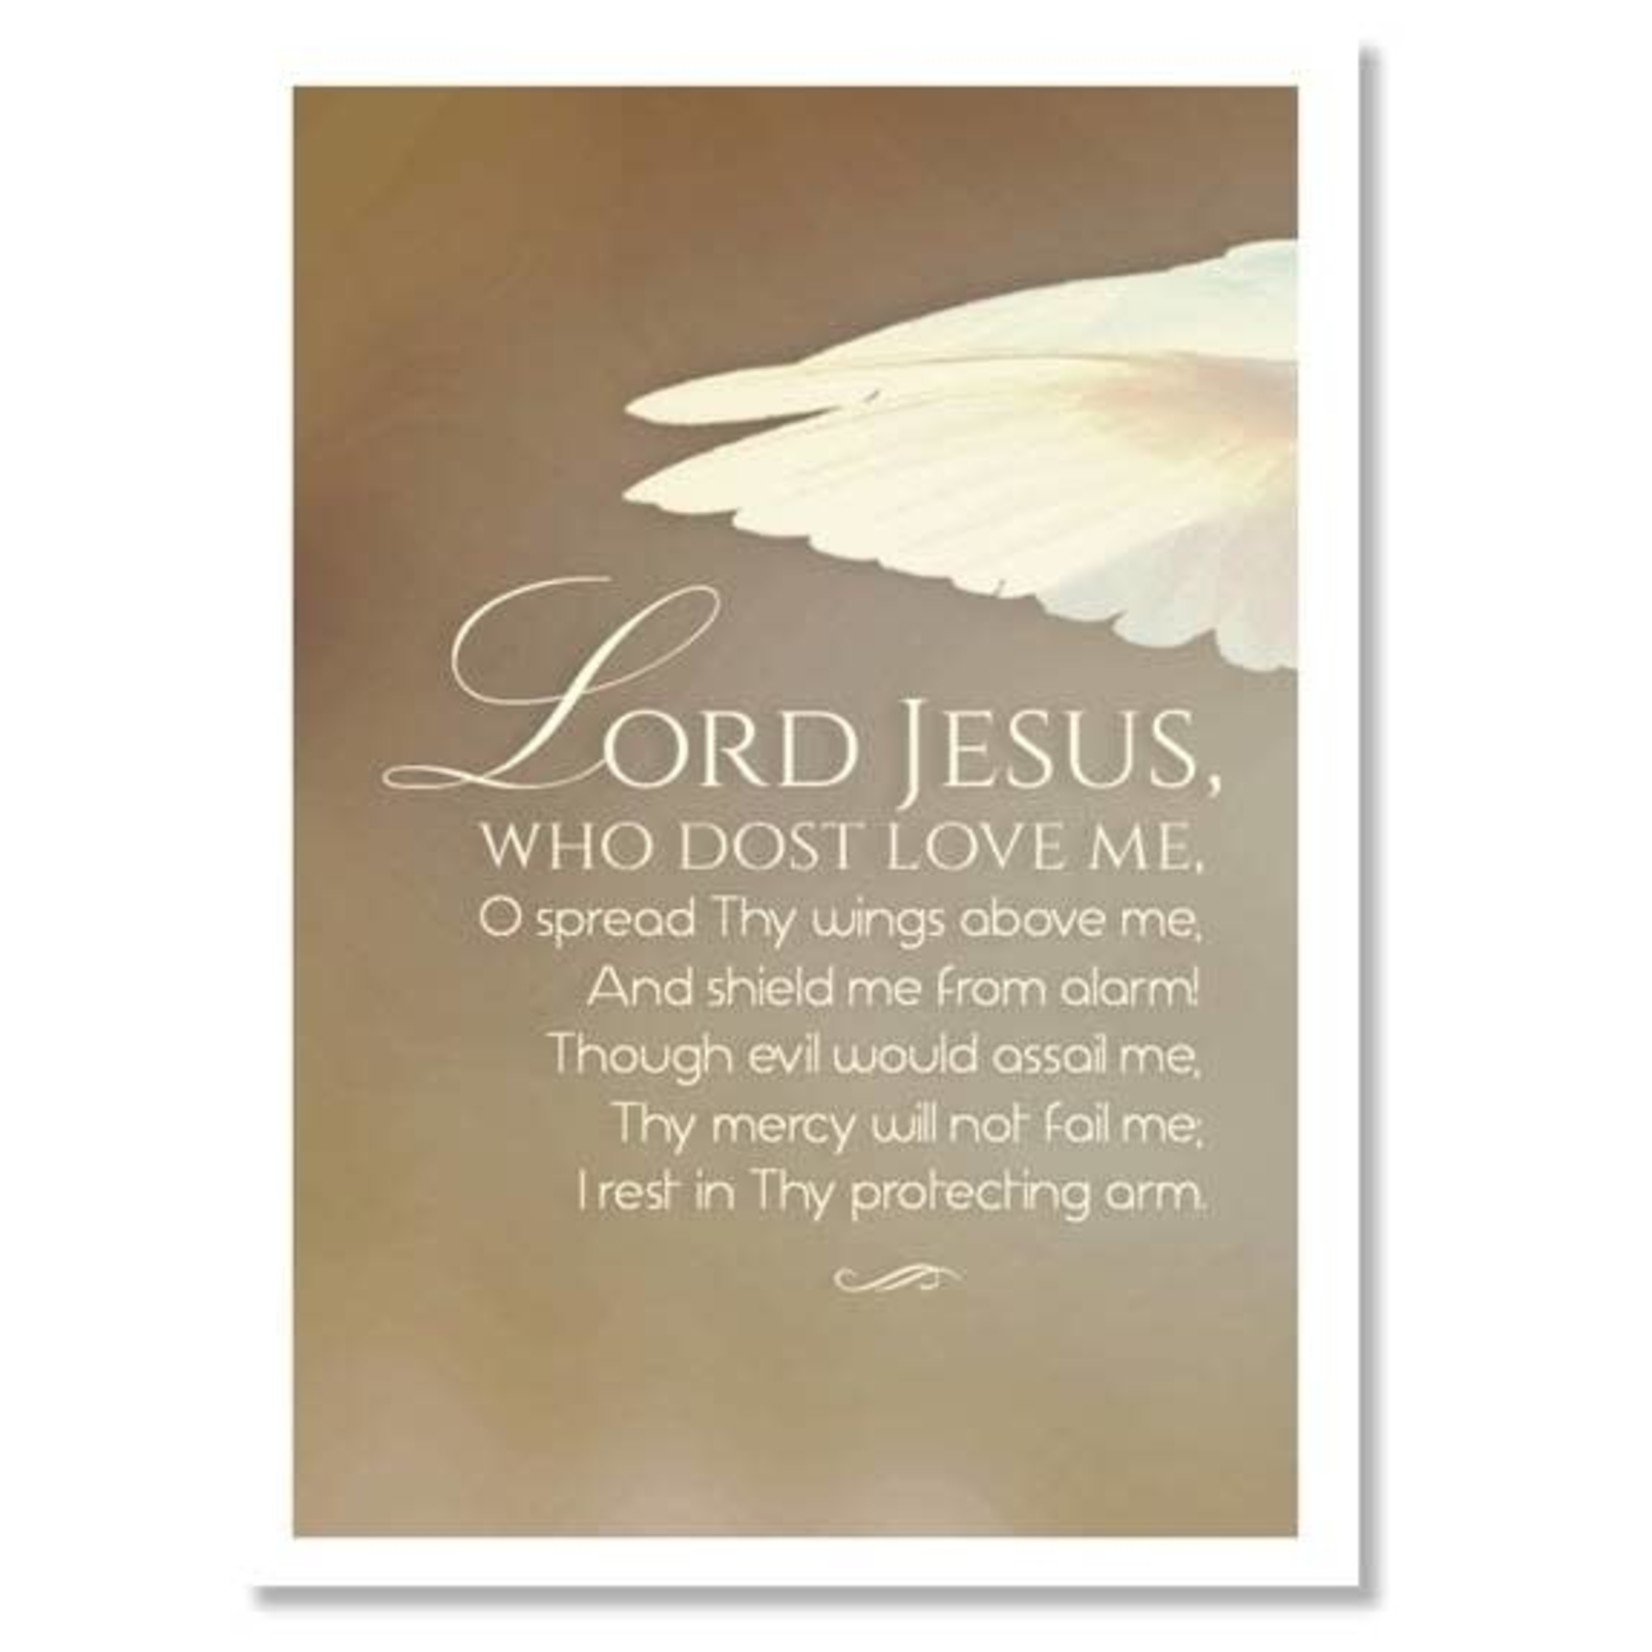 Hymns In My Heart - 5x7" Greeting Card - Baby (Newborn) - Lord Jesus Who Dost Love Me